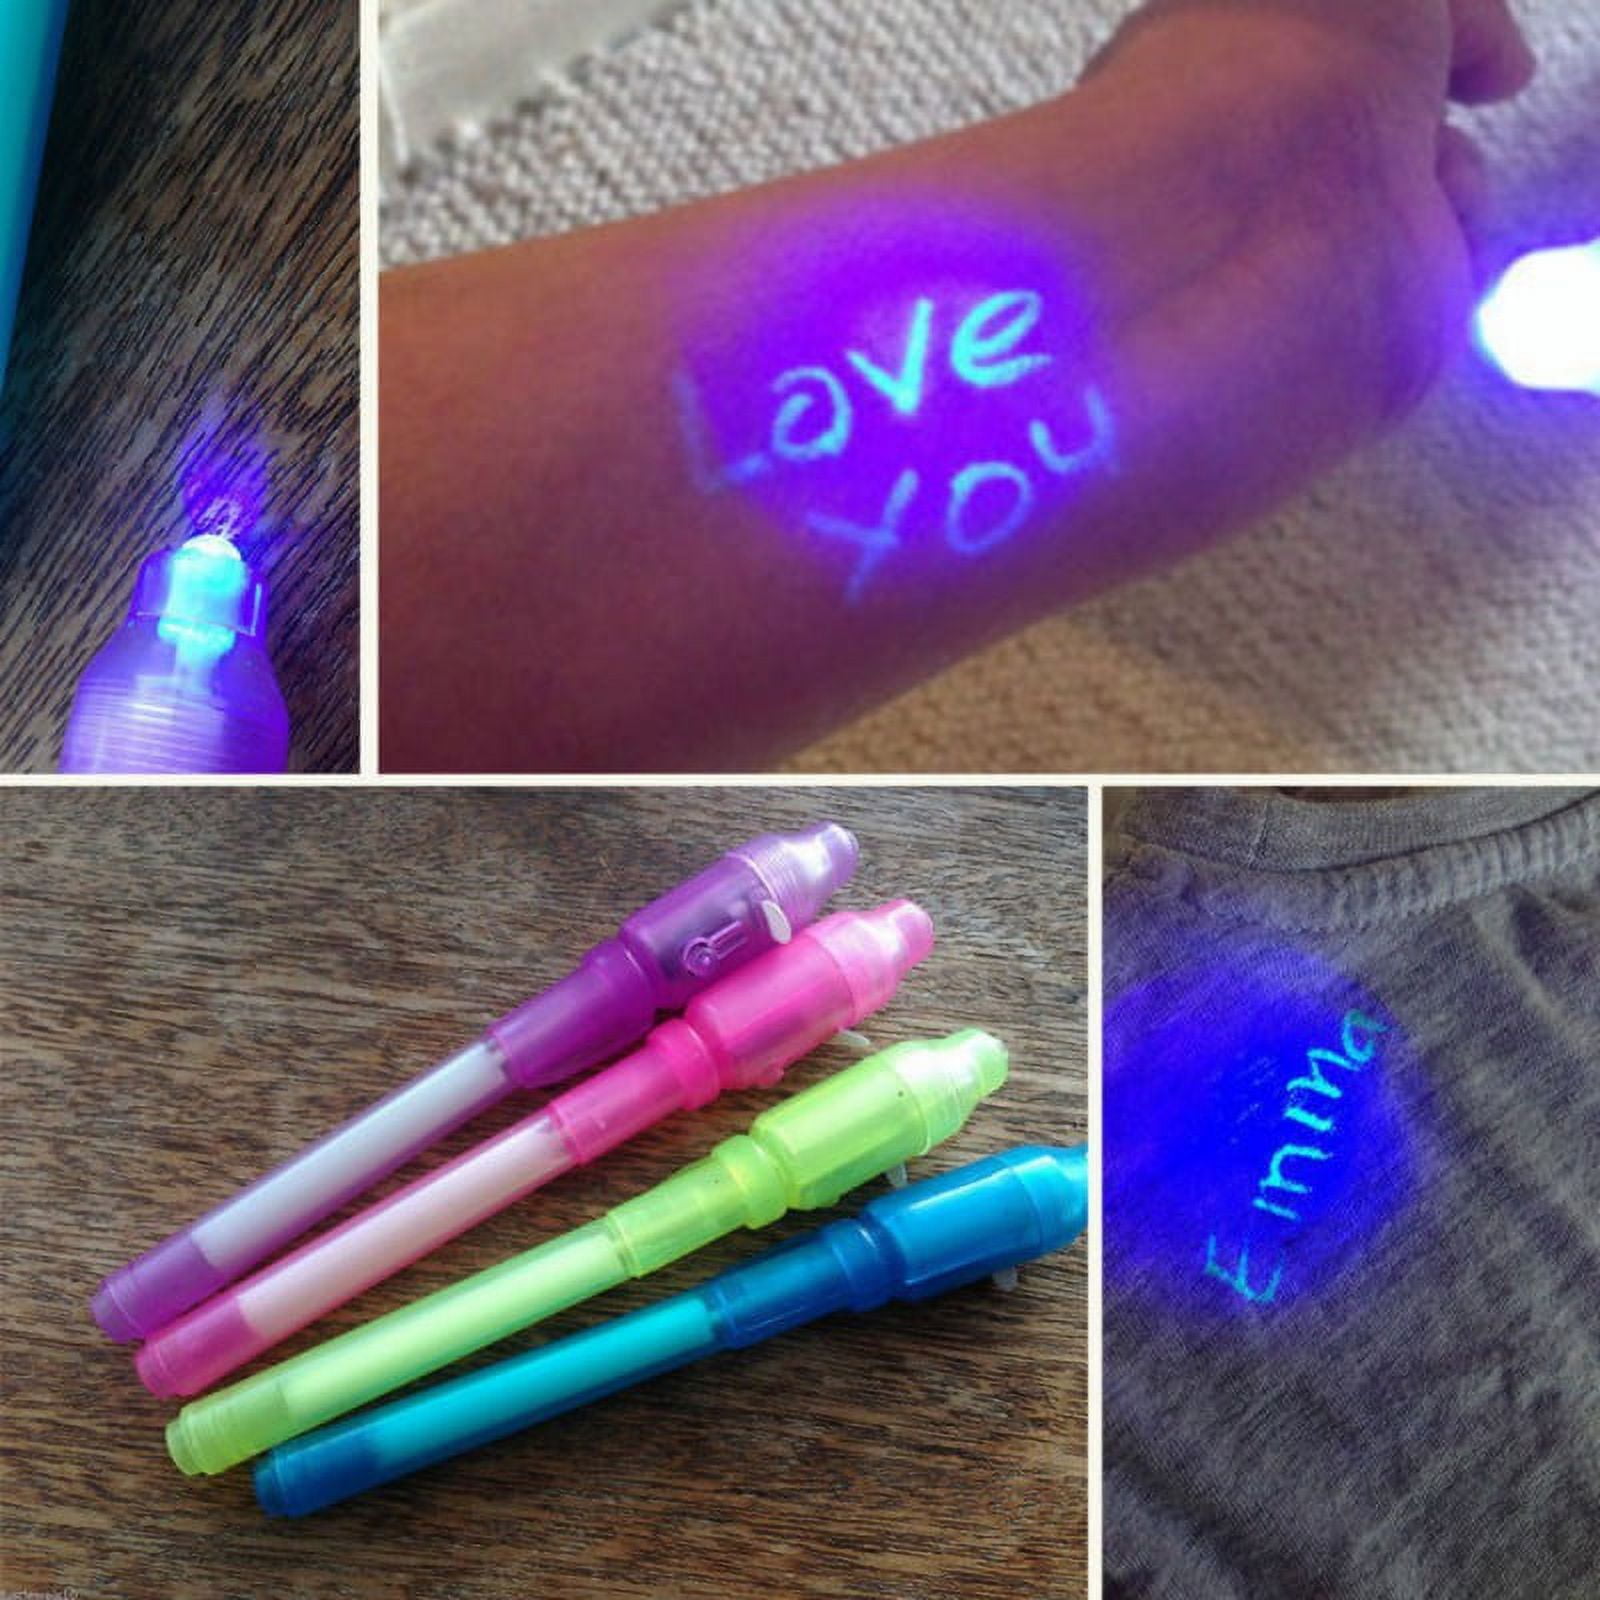 HESITONE Colorful Invisible Ink Pen with UV Light Invisible Marker Pen for  Boy Girl Gift 